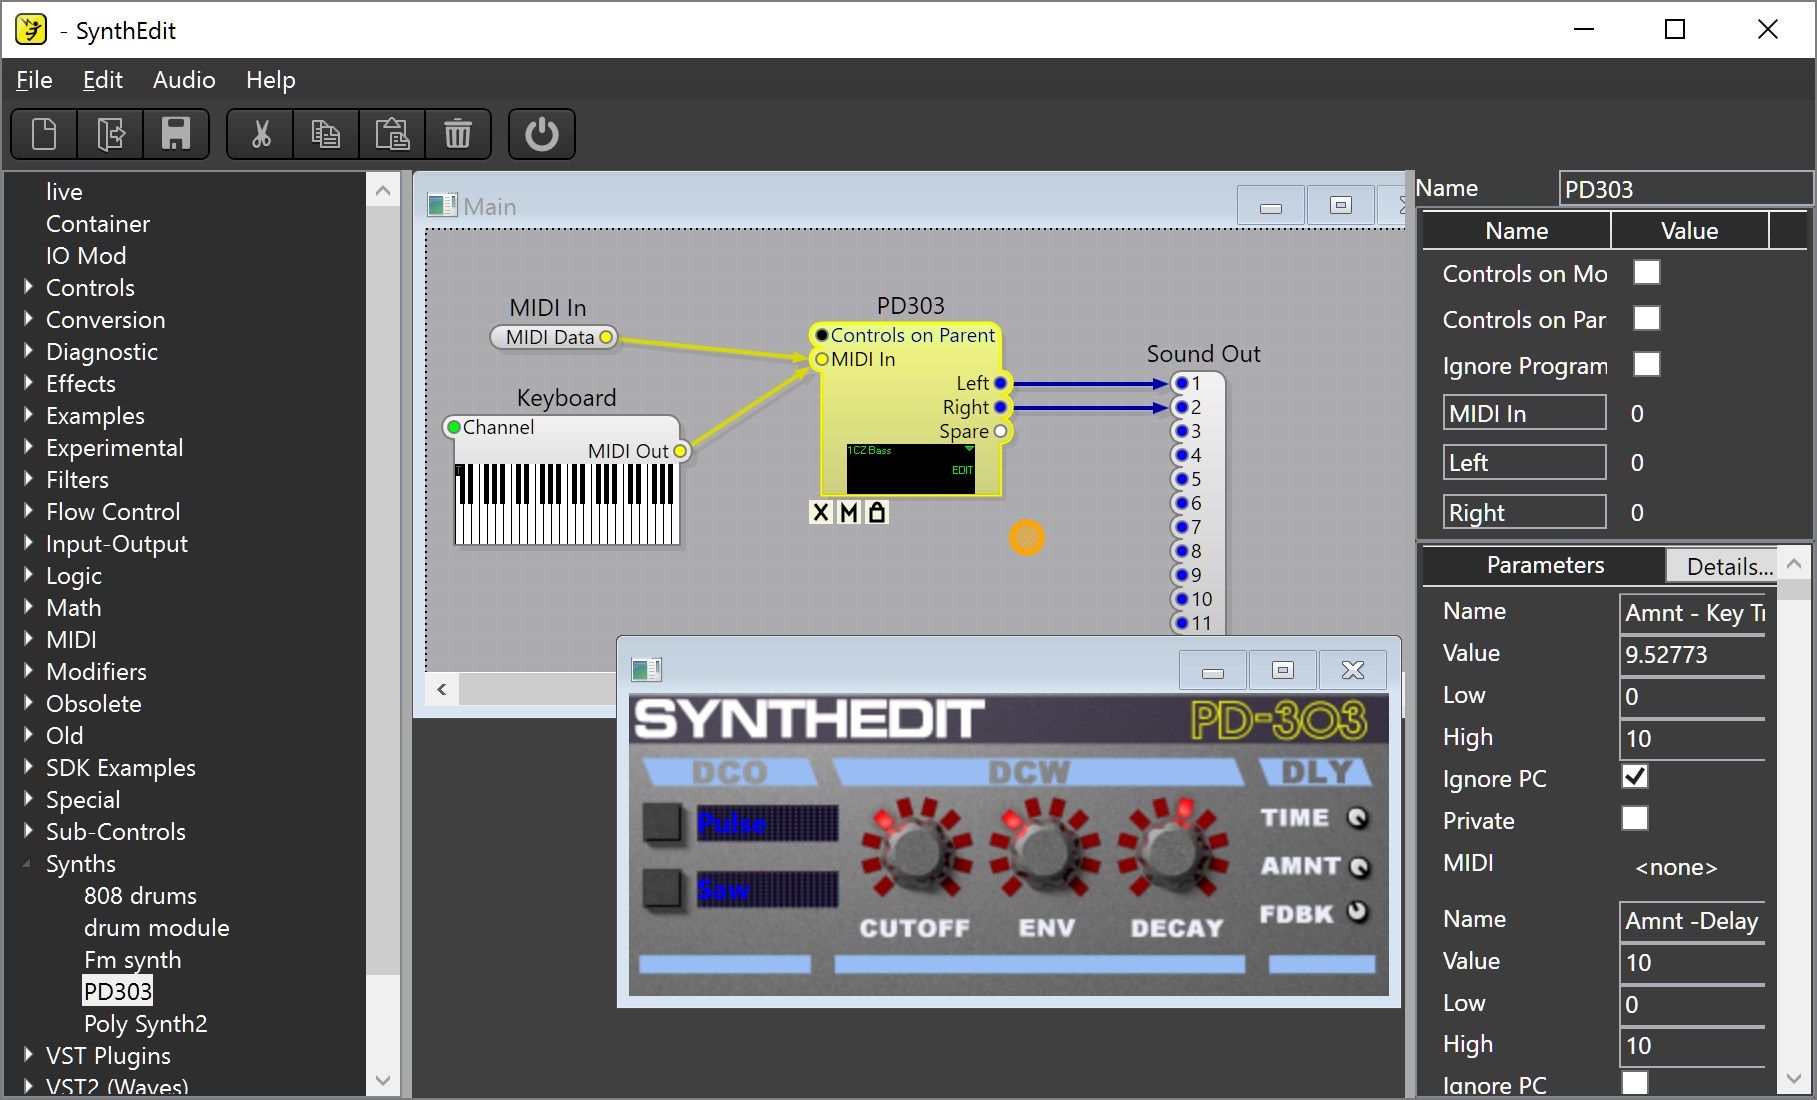 SynthEdit